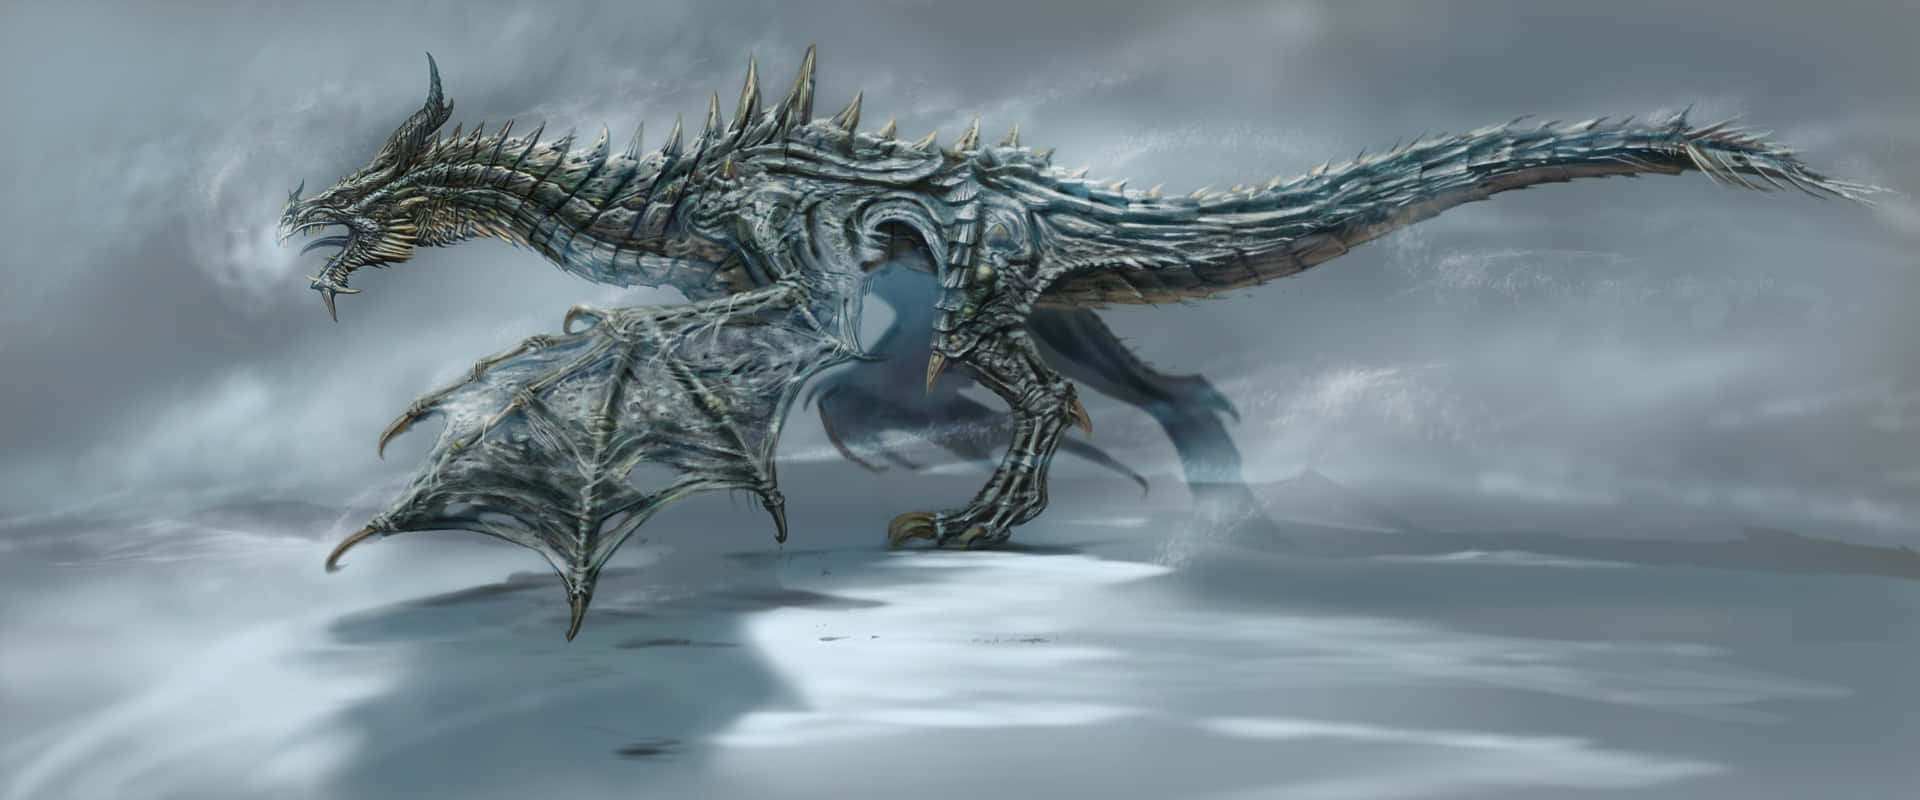 The majestic Paarthurnax perched atop the Throat of the World in Skyrim. Wallpaper